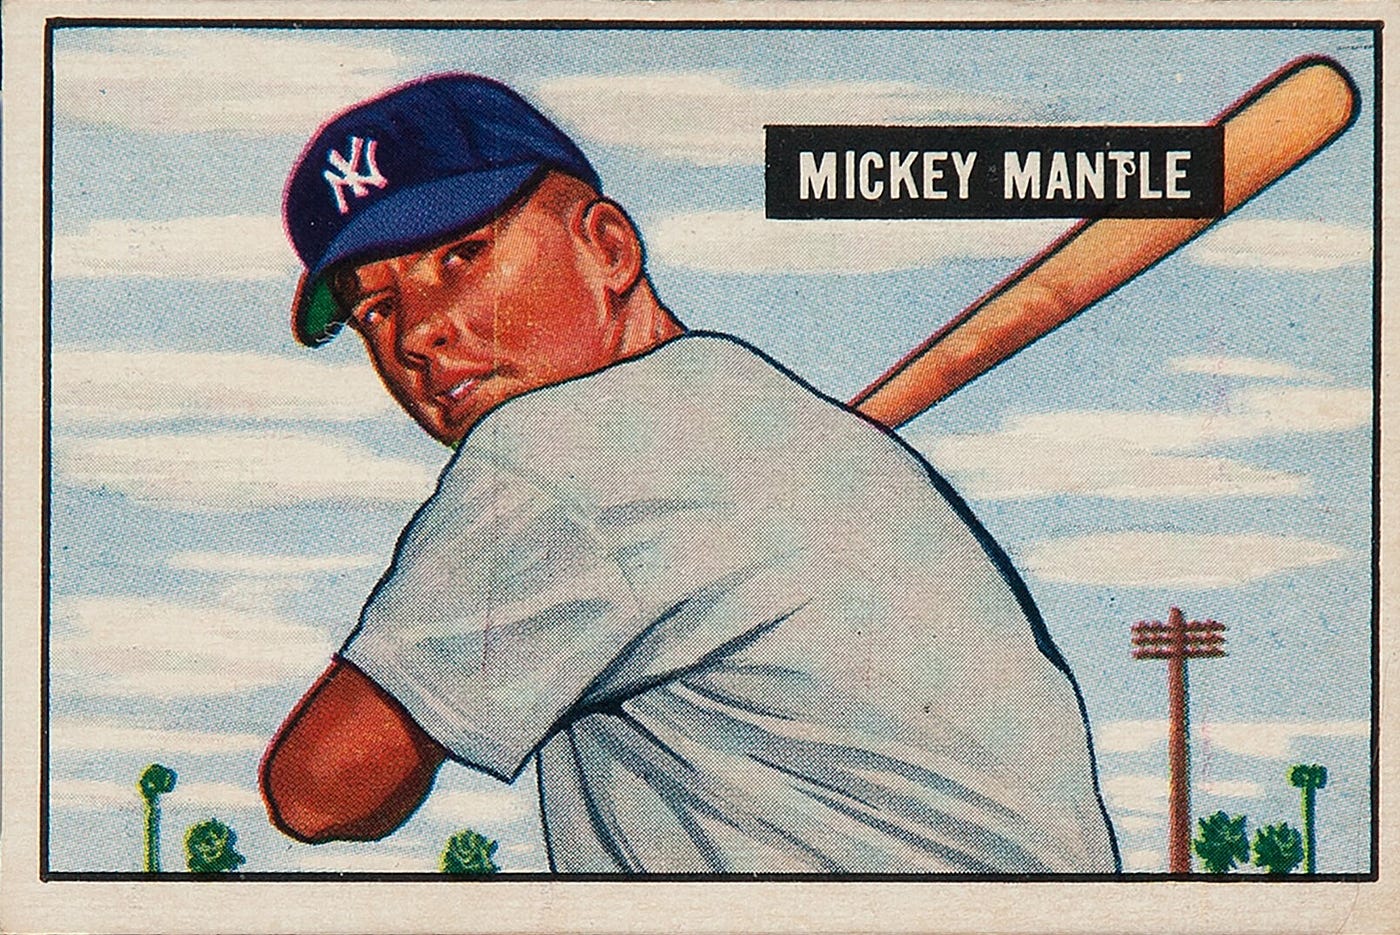 The 1952 Topps Mantle Card. Baseball in 25 Objects: nineteenth in… | by  John Thorn | Our Game